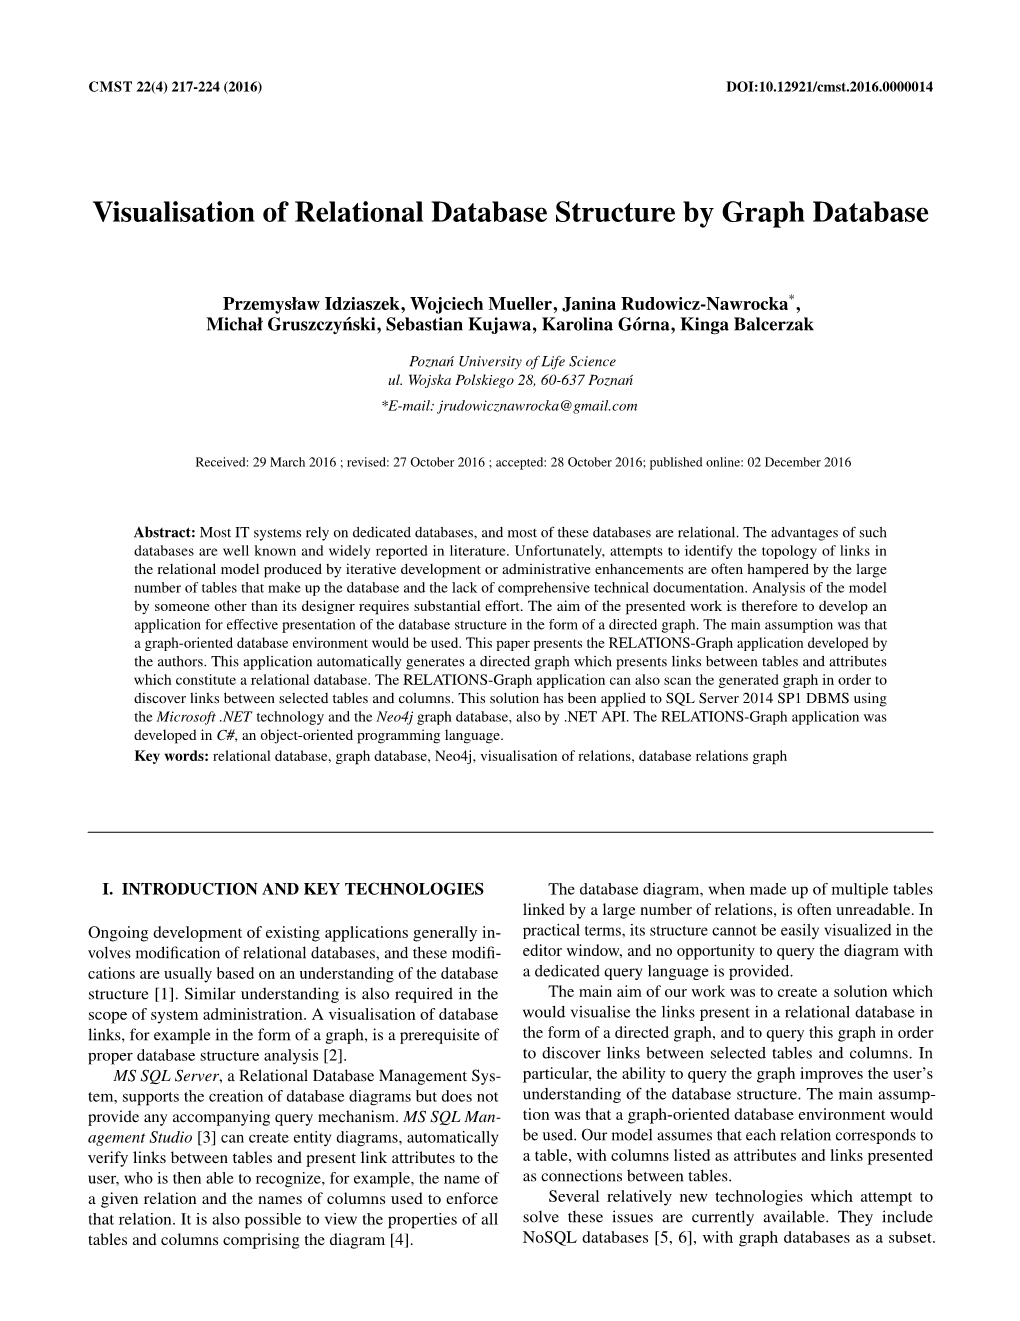 Visualisation of Relational Database Structure by Graph Database